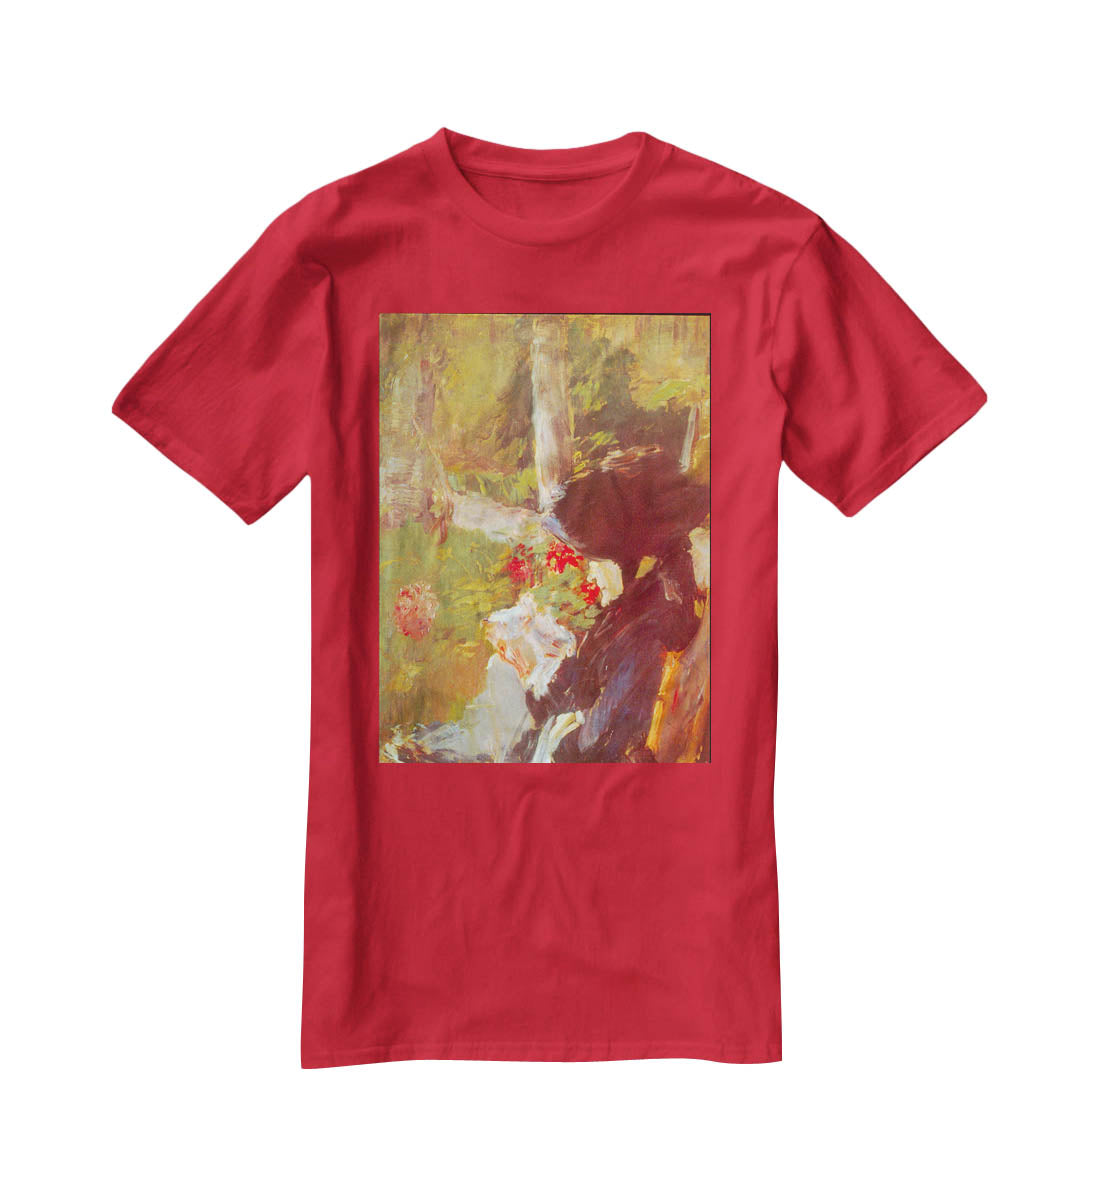 Manets Mother by Manet T-Shirt - Canvas Art Rocks - 4